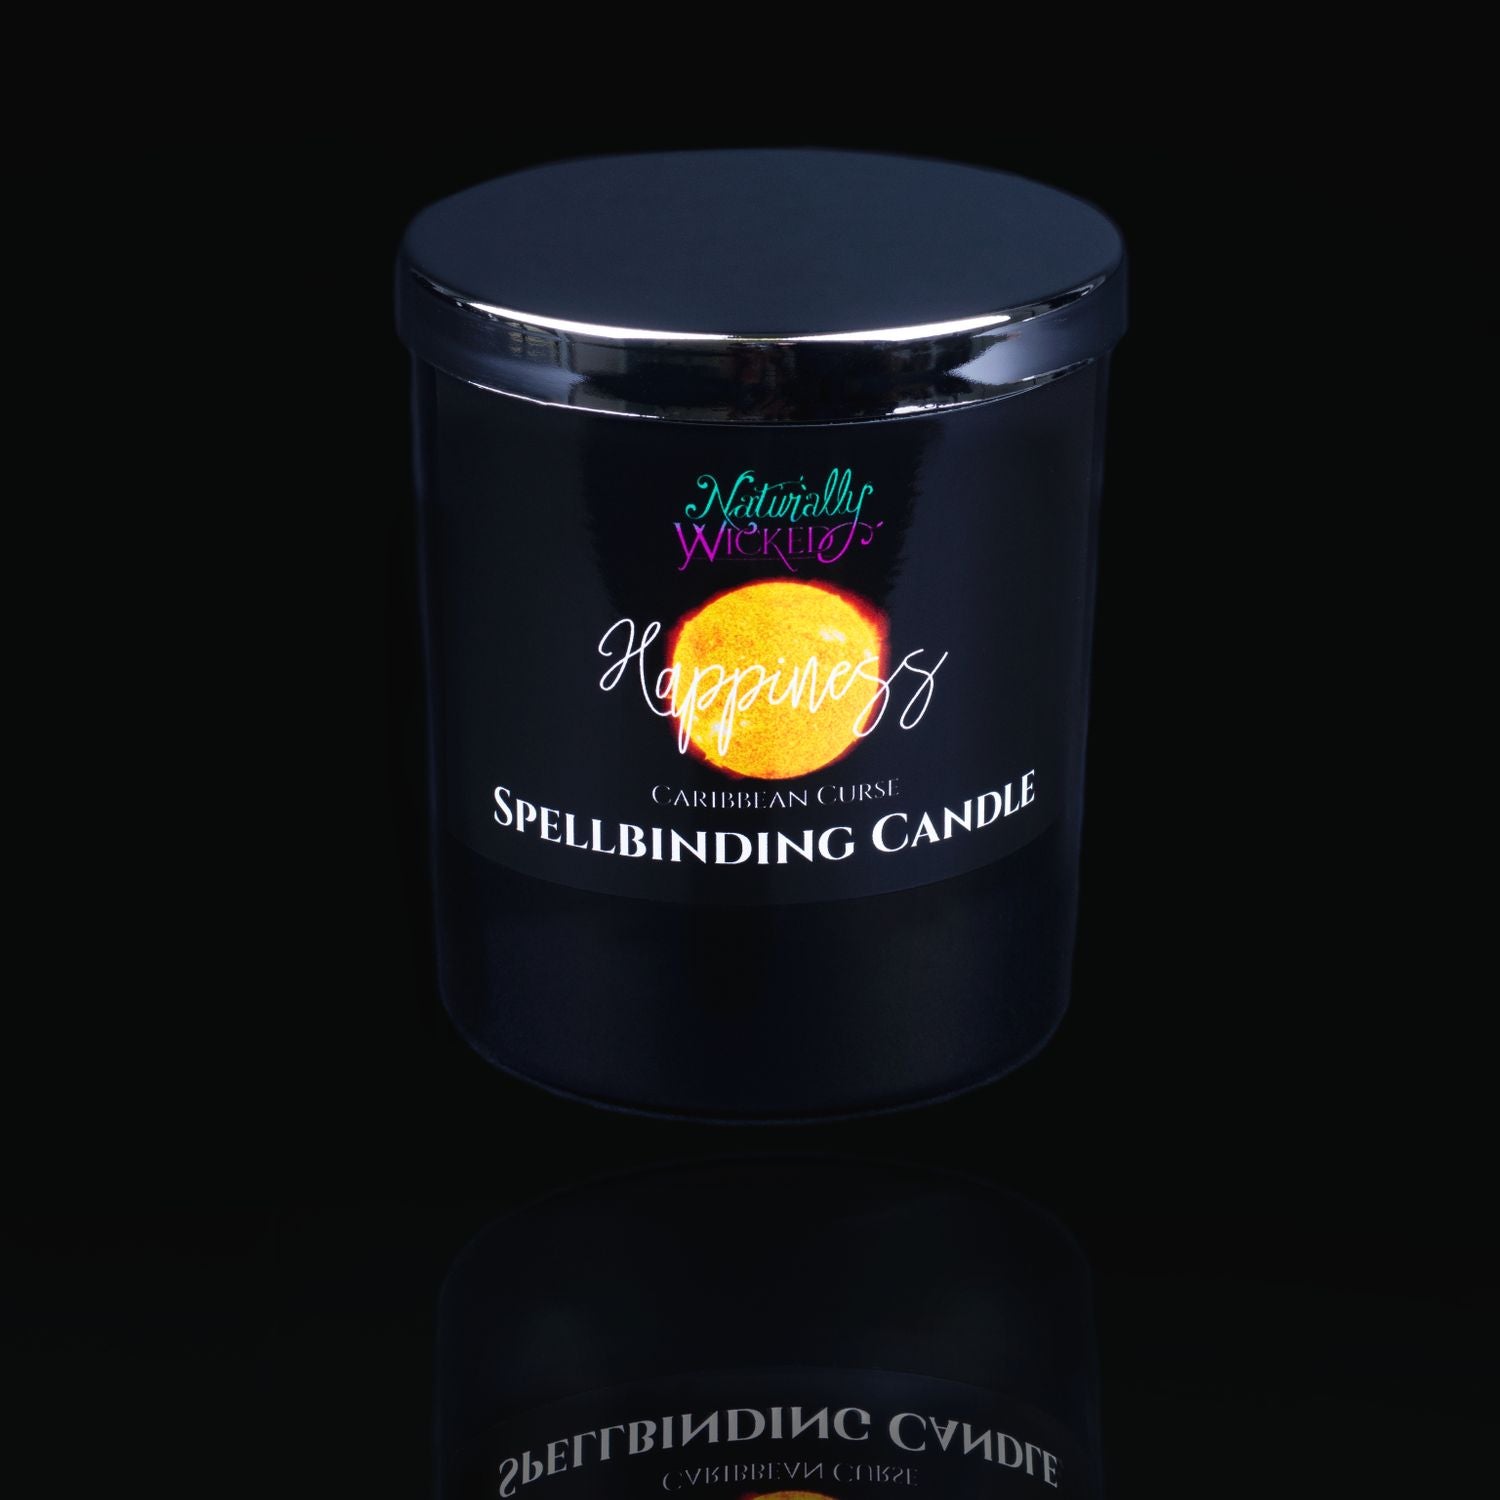 Happiness Is A Gift For Everyone. Naturally Wicked Spellbinding Happiness Spell Candle With Mirror Finished Exquisite Lid In Place. Featuring A Black Gloss Label And A Bright Yellow Sun